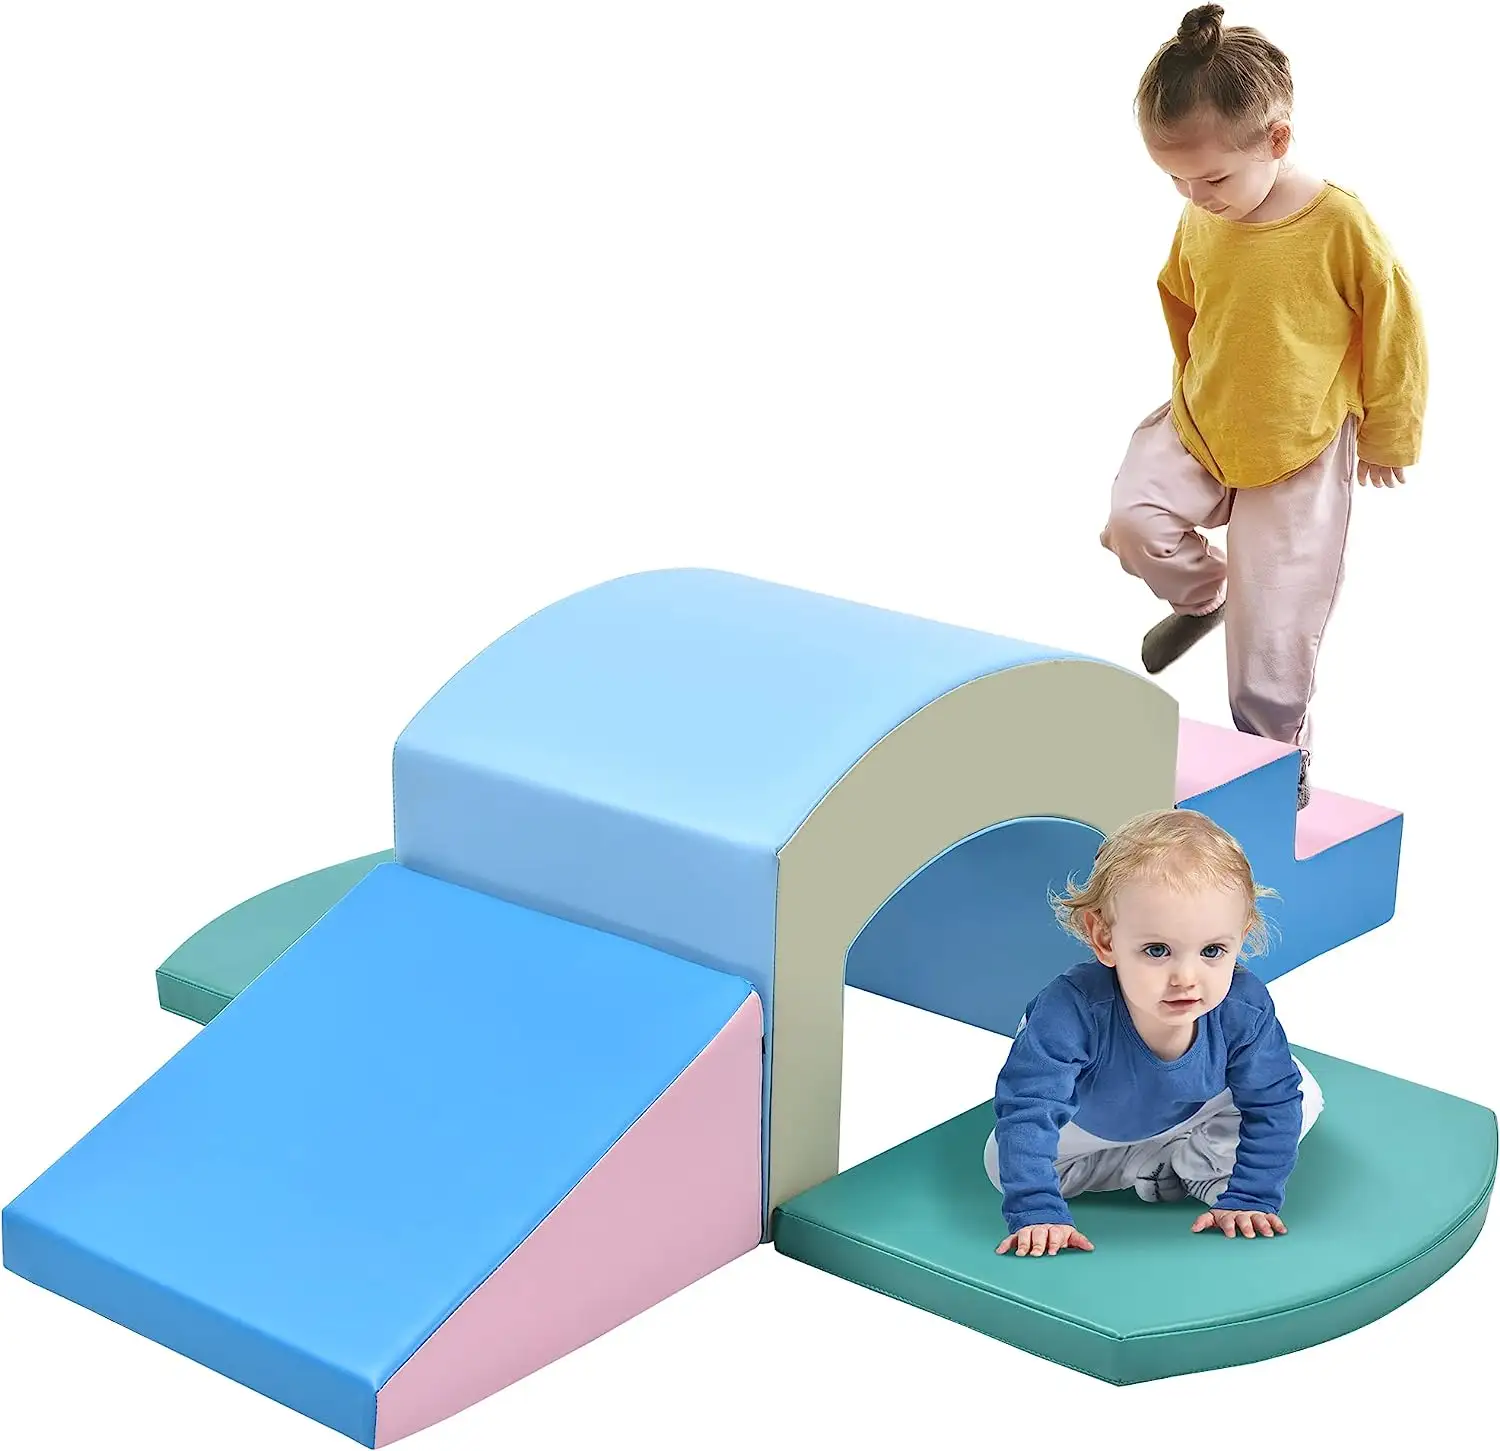 Portable Foam Mats Indoor Playground Soft Play Couch Kids Party Soft Play